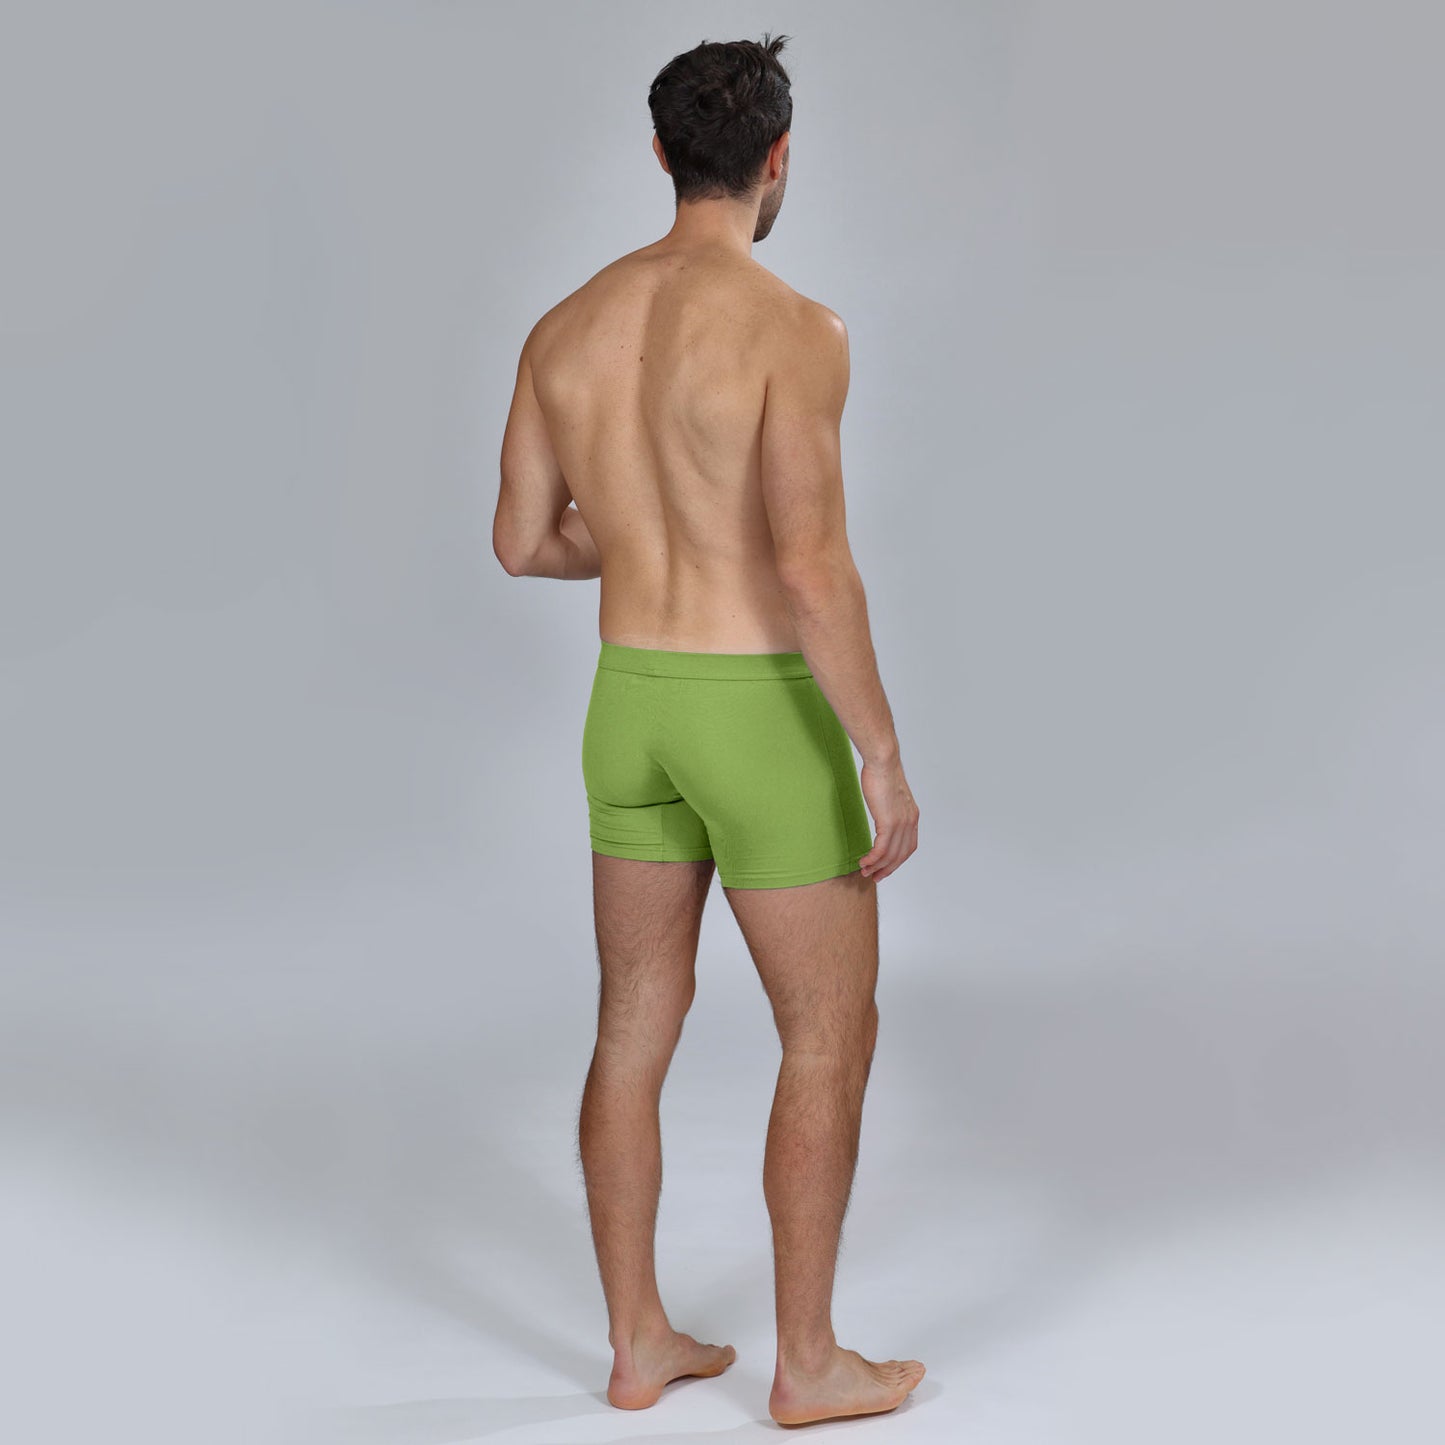 The Limited Edition Greenery Boxer Brief for men in the USA and Canada